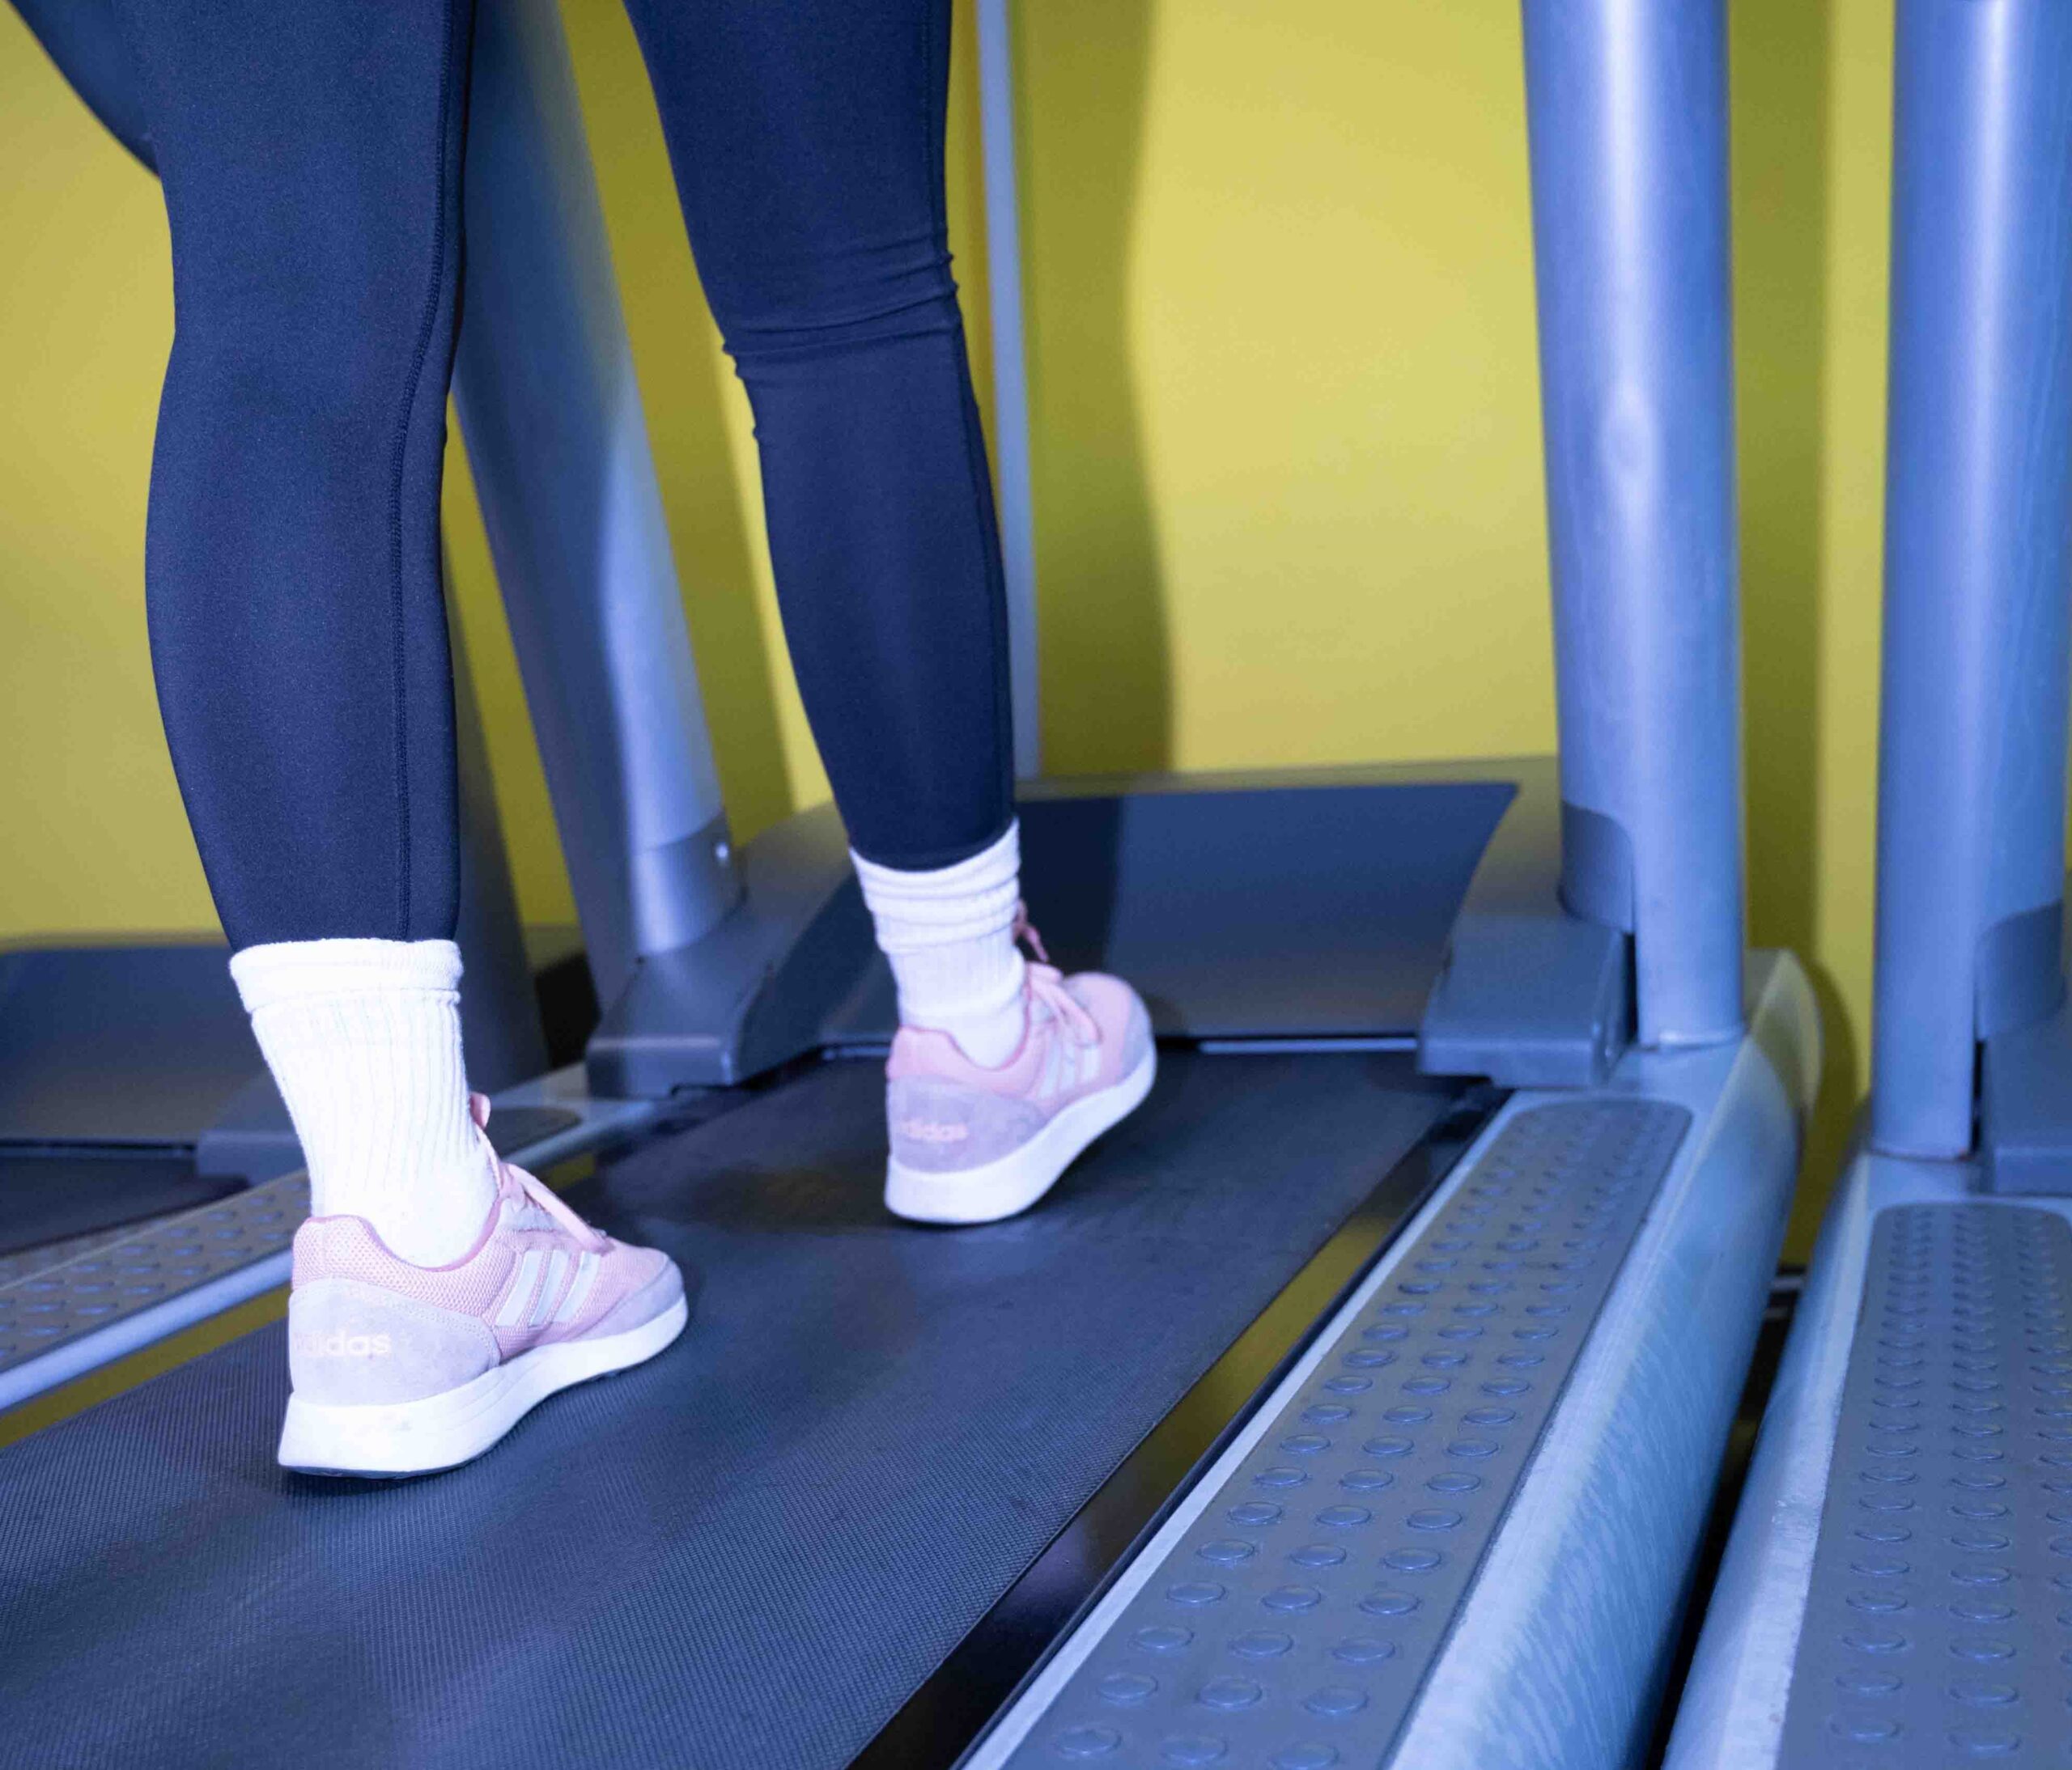 A girl in pink sneakers running on a treadmill